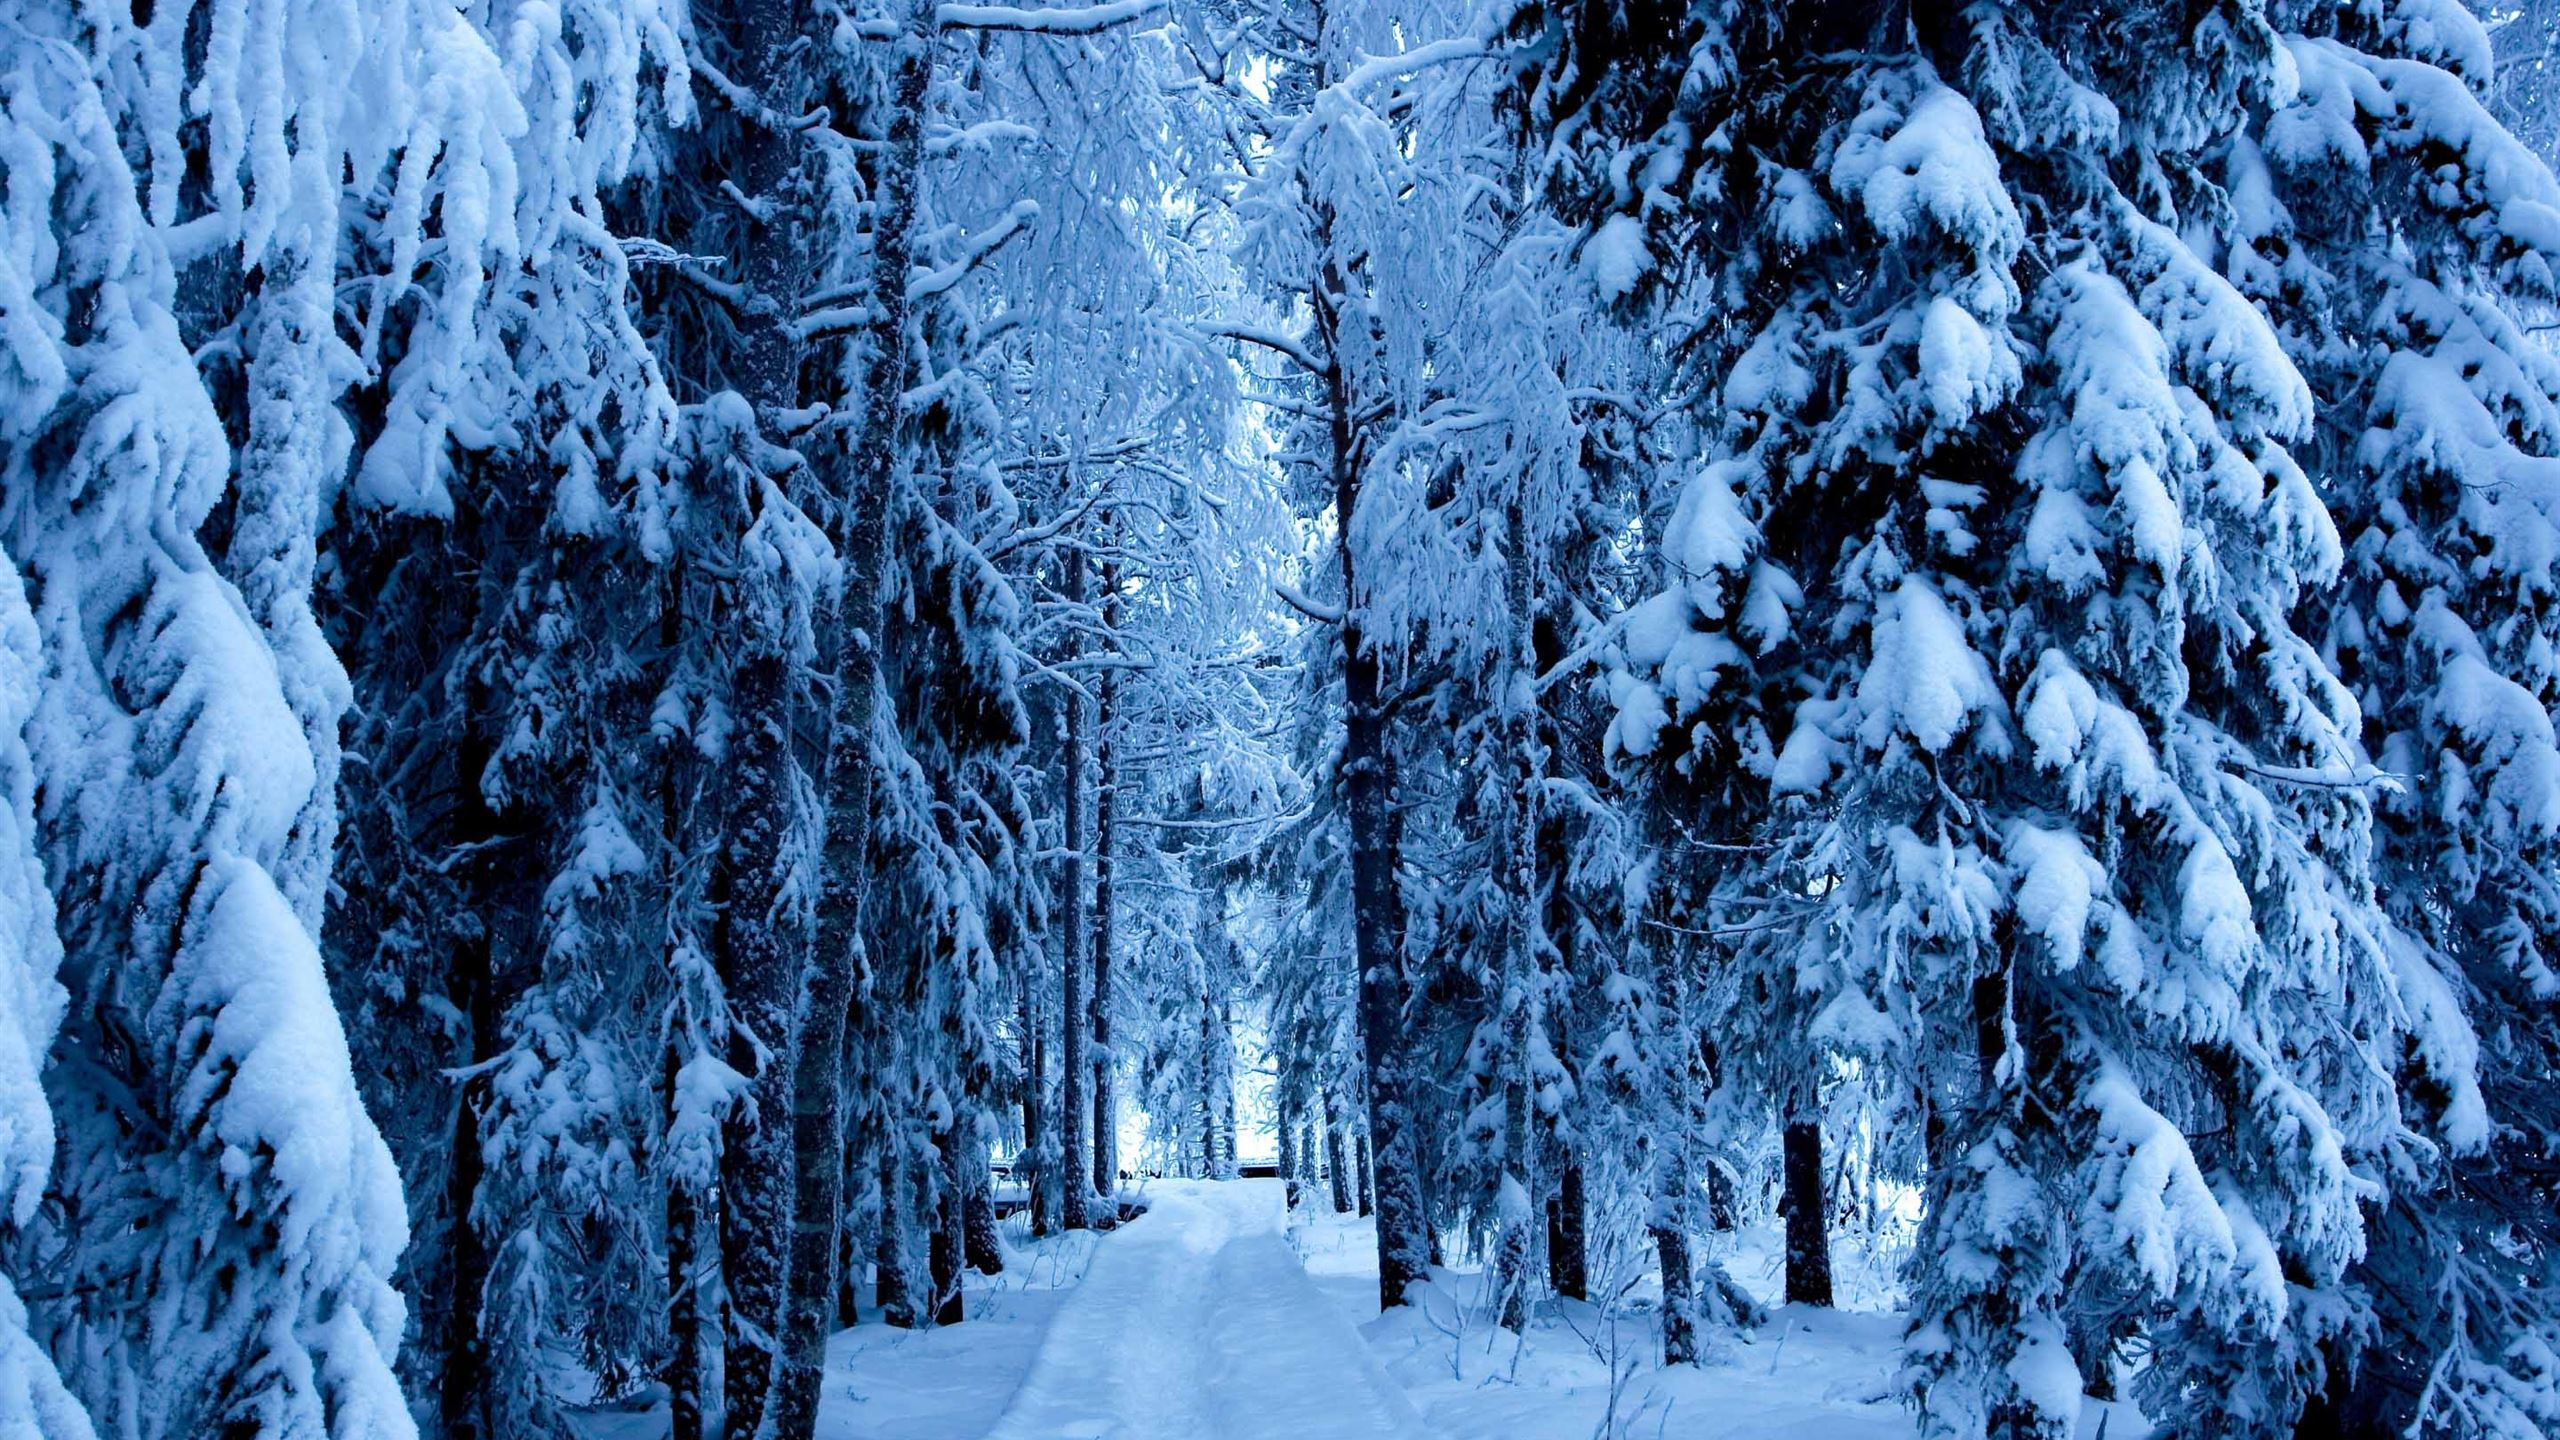 Forest trails in the snow macbook air wallpaper download